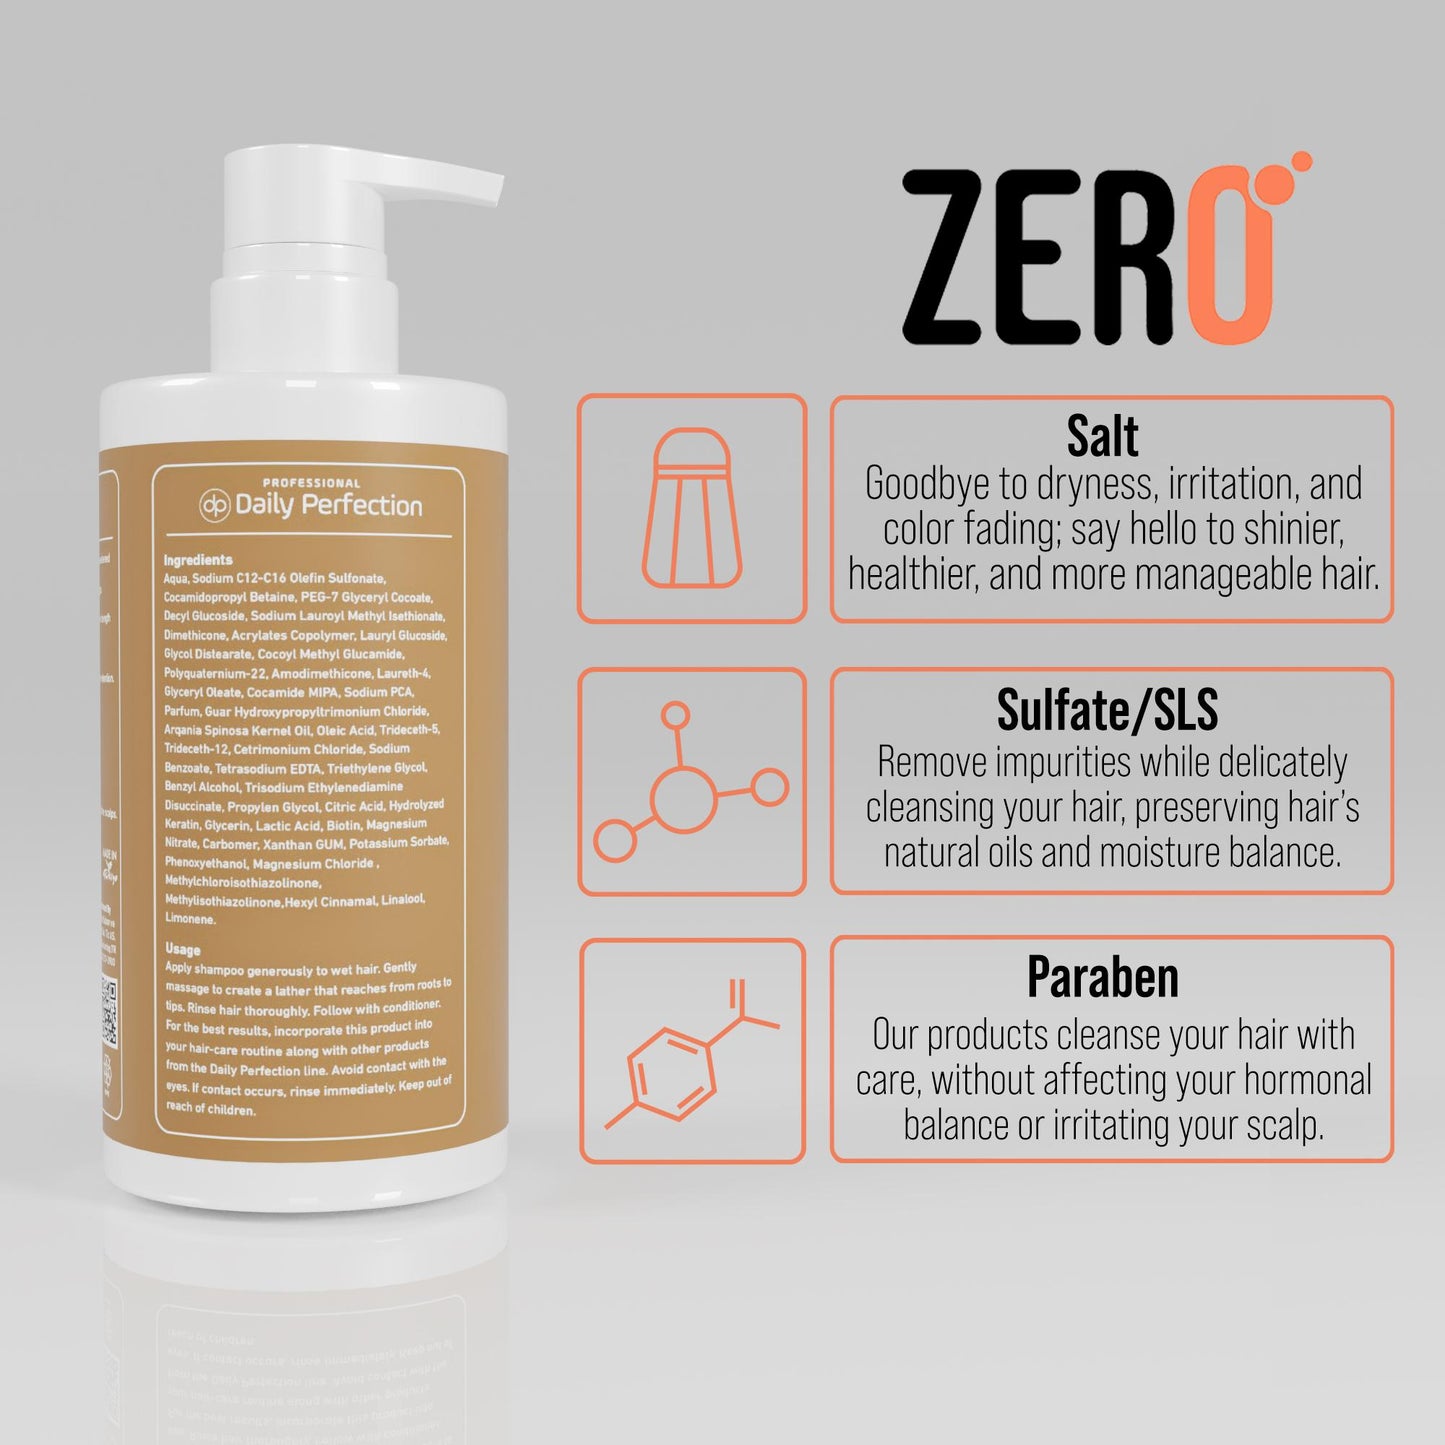 infographic explains the benefits of salt free,sulfate free, paraben free formula that is used in Daily Perfection Argan Oil Shampoo